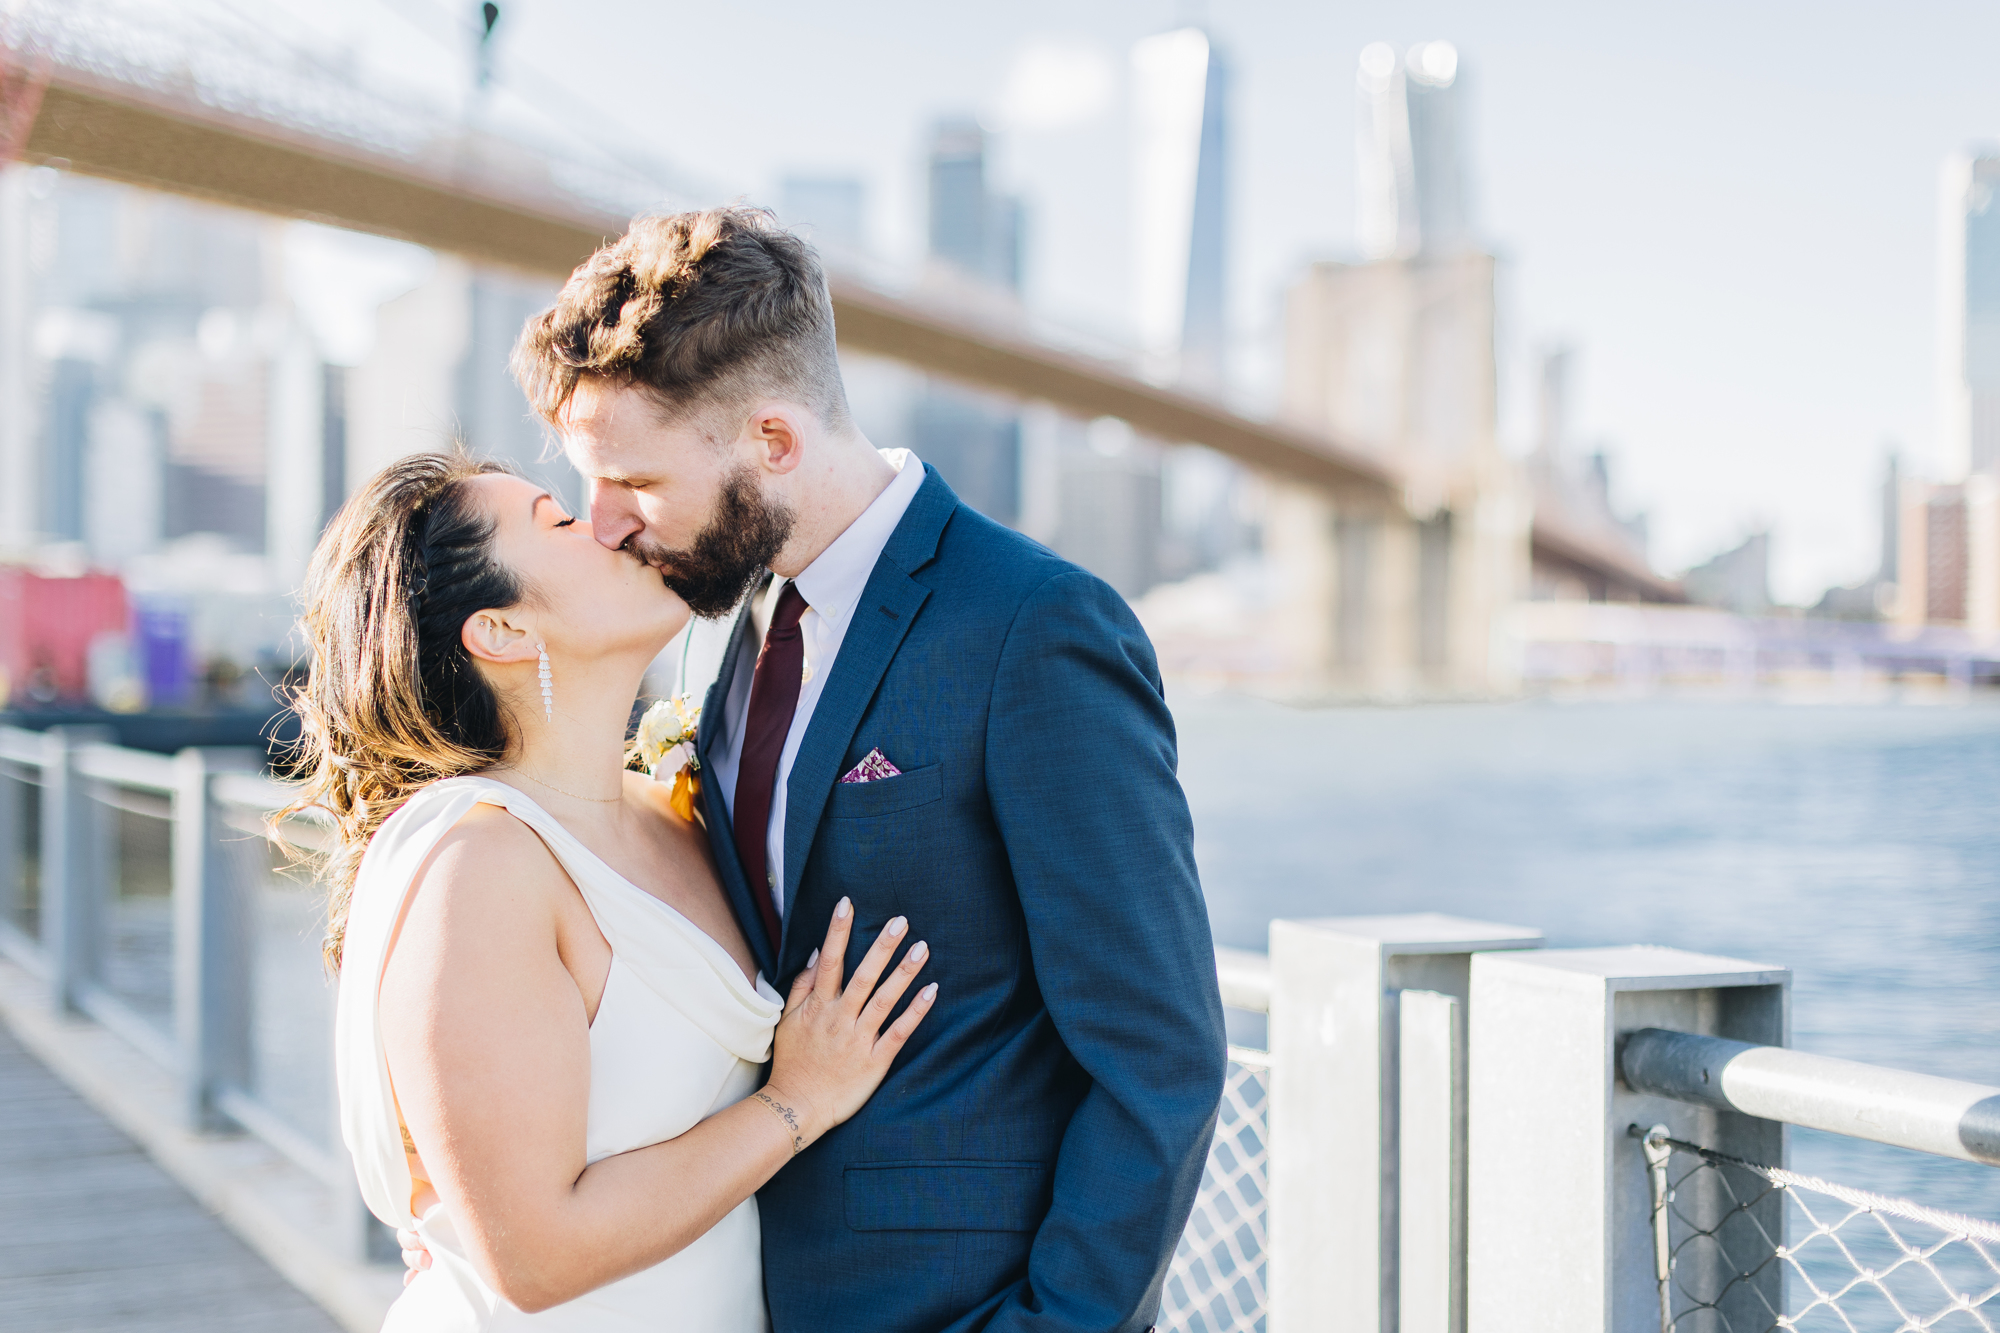 Light Fall DUMBO Elopement with NYC views and foliage